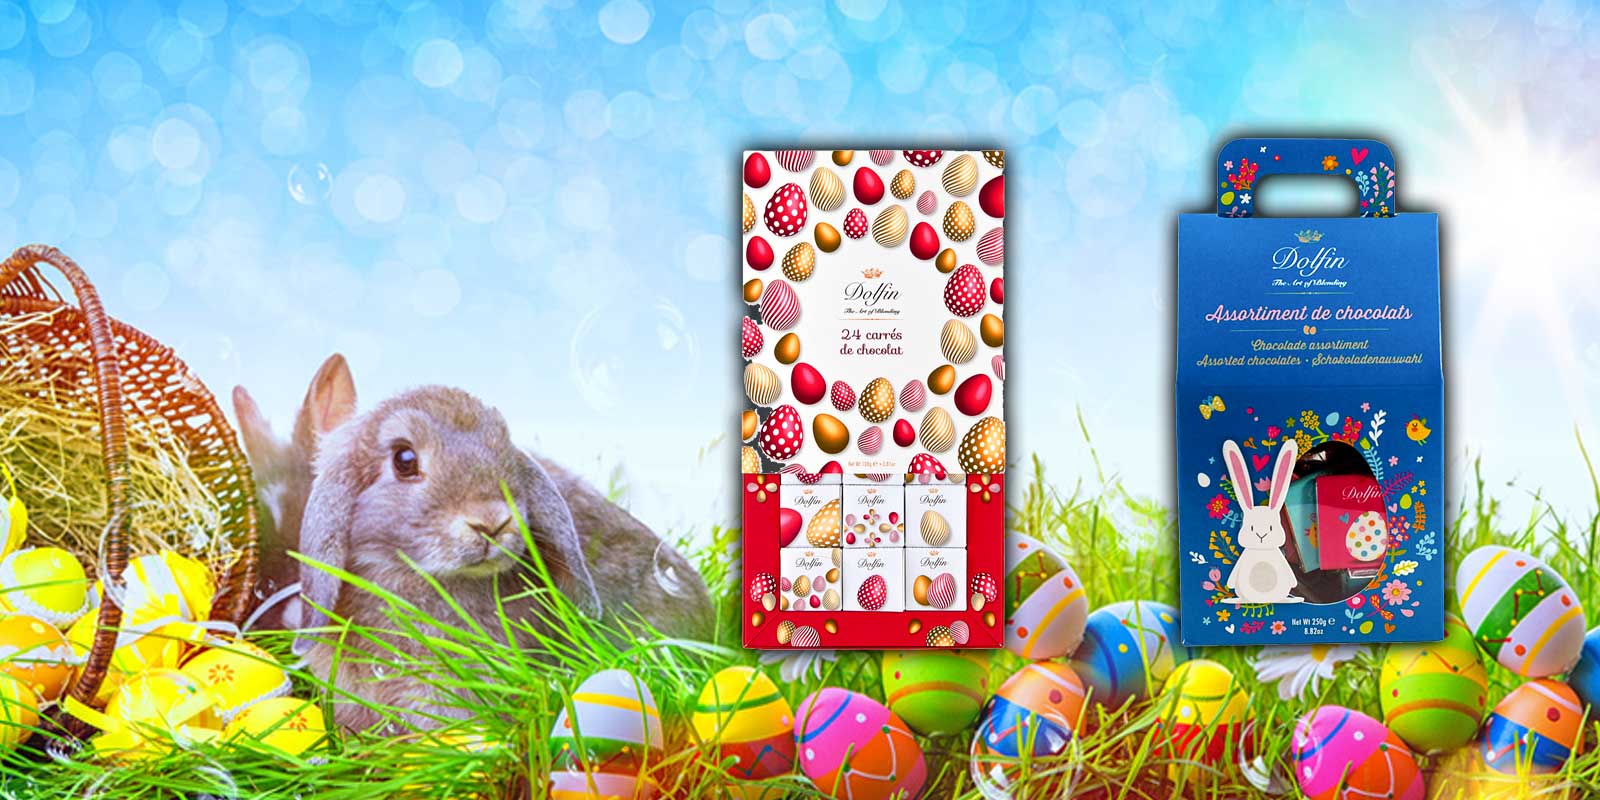 Easter Here you will find a chocolaty selection of Easter surprises from Venchi, Caffarel, Peters Pralinen and Majani